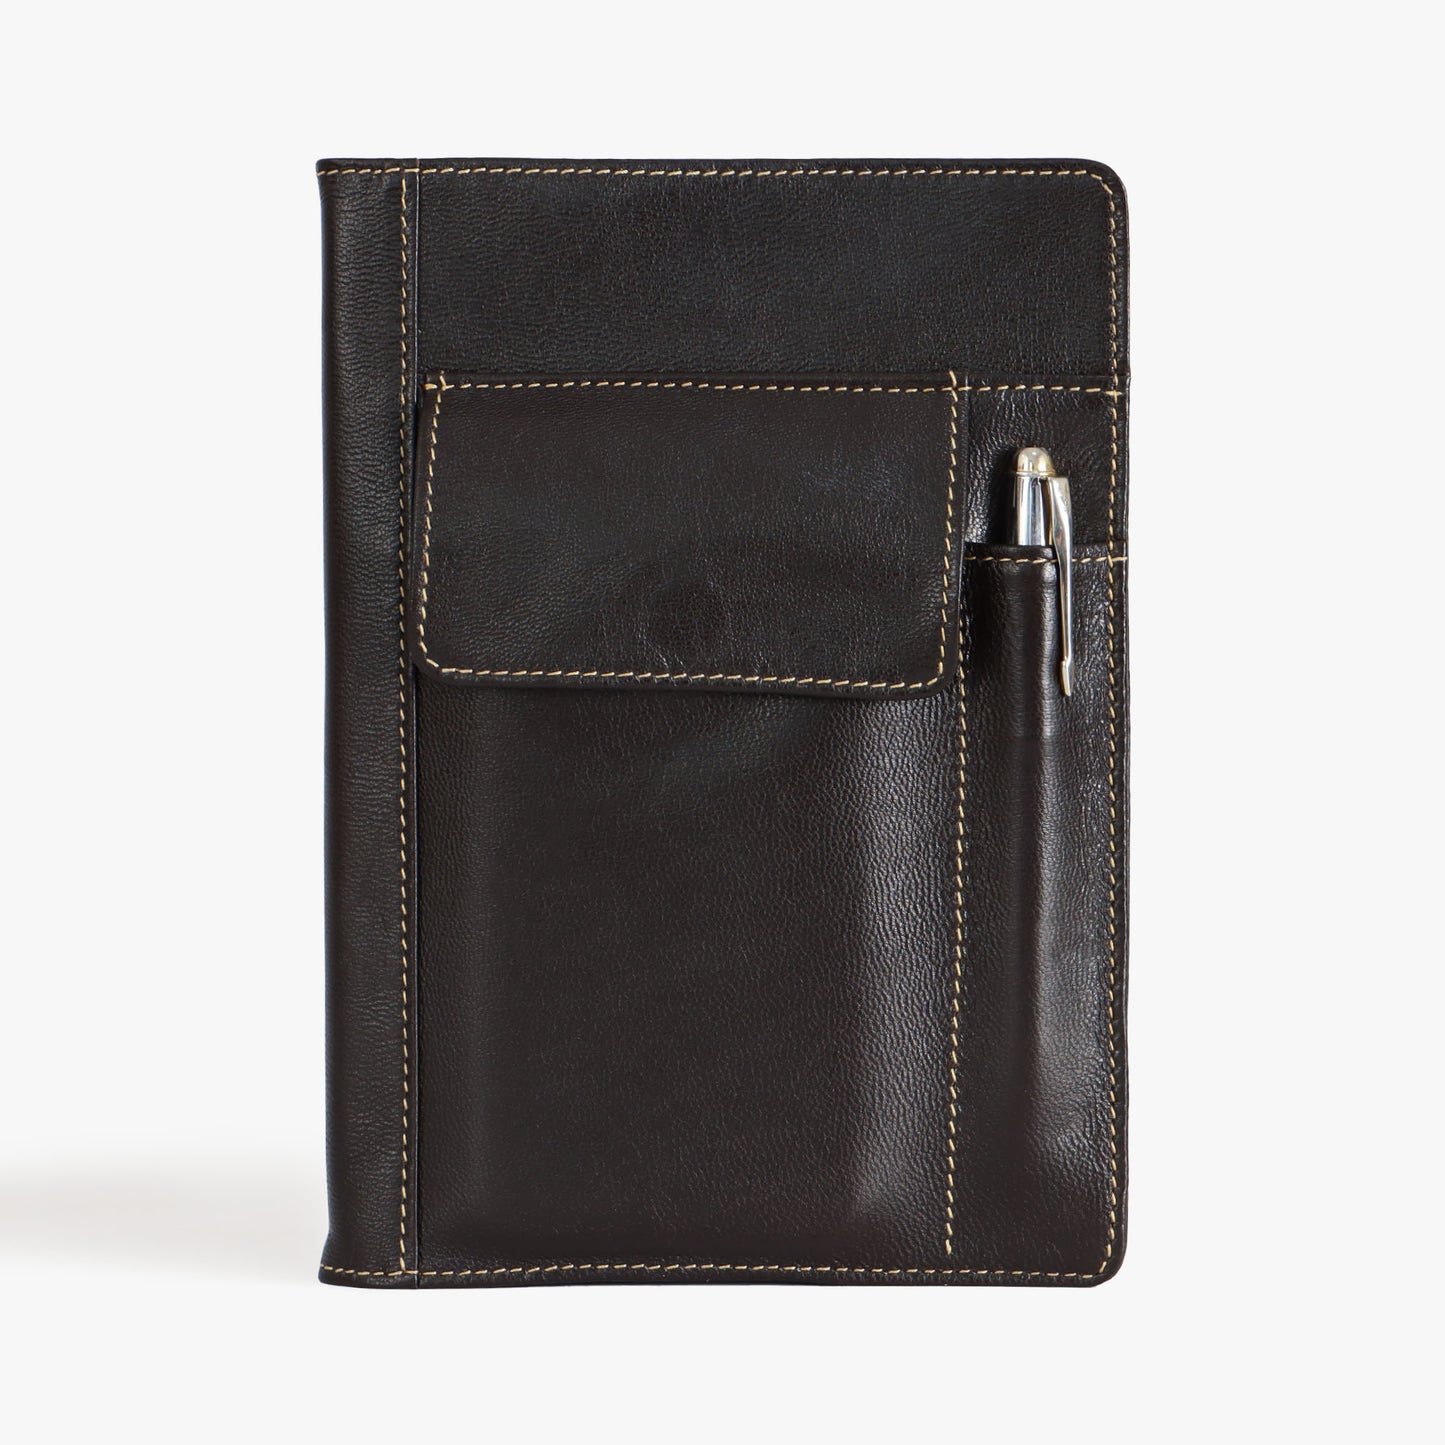 Refillable Leather A5 Notebook with Pen Pocket and Mobile Phone Pocket